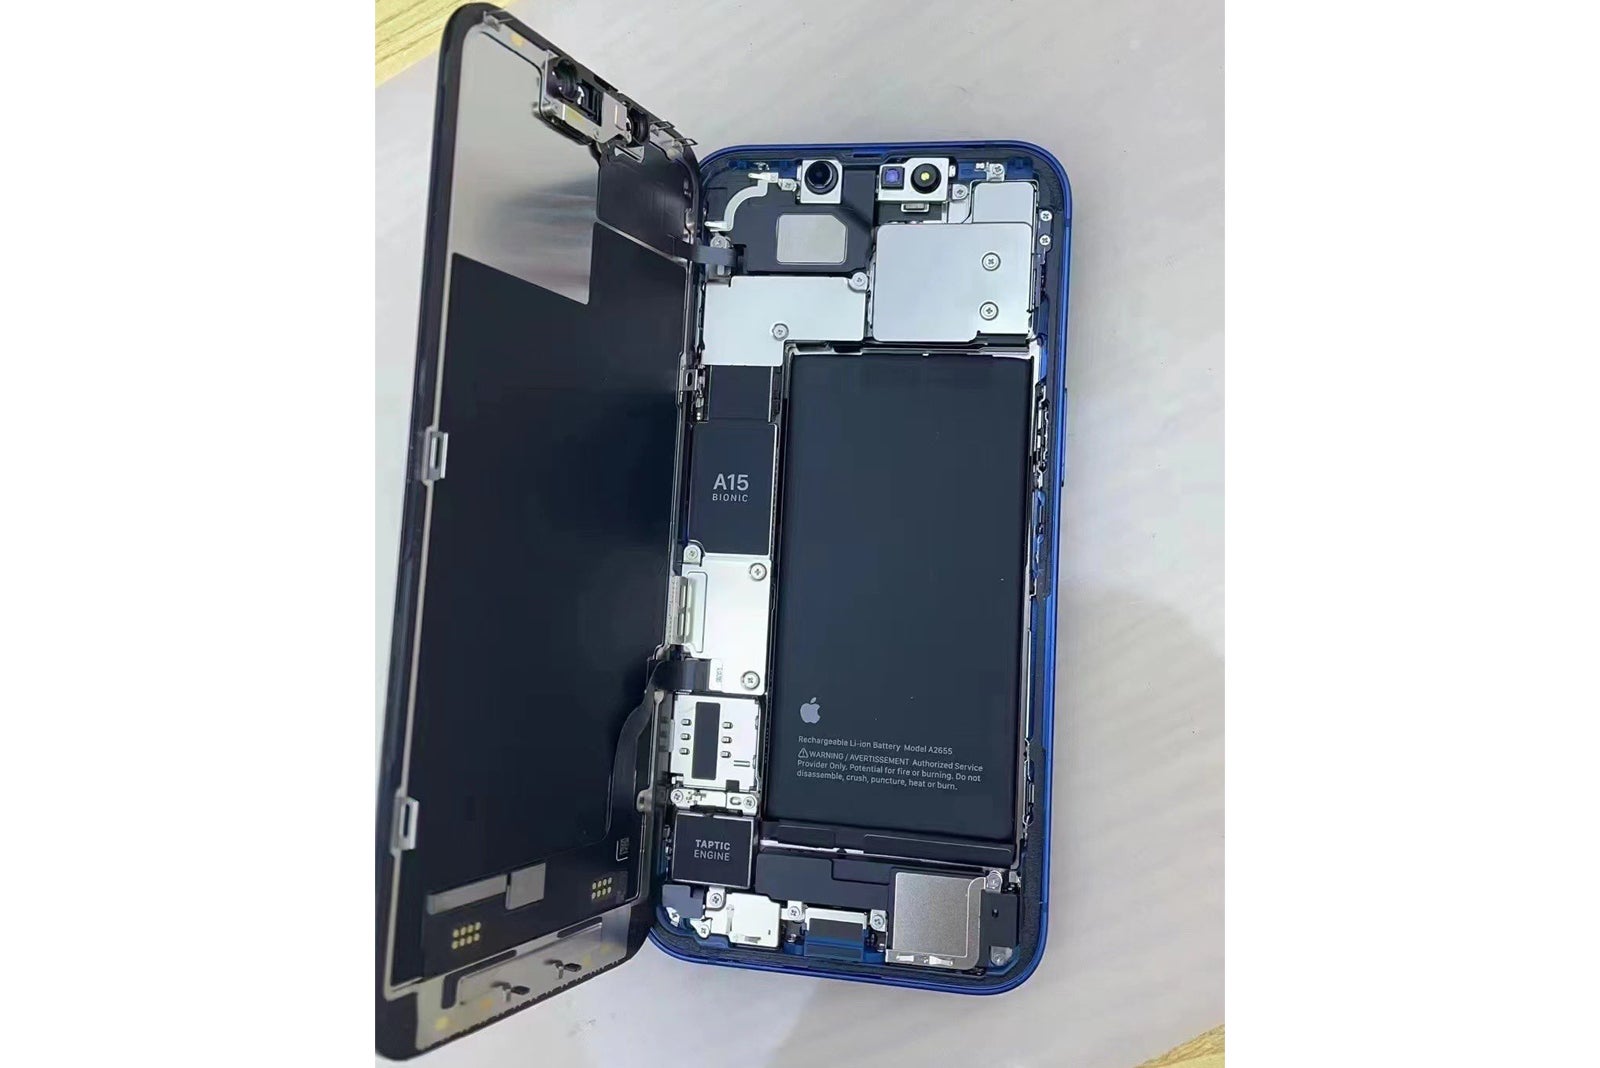 A first look inside the iPhone 13